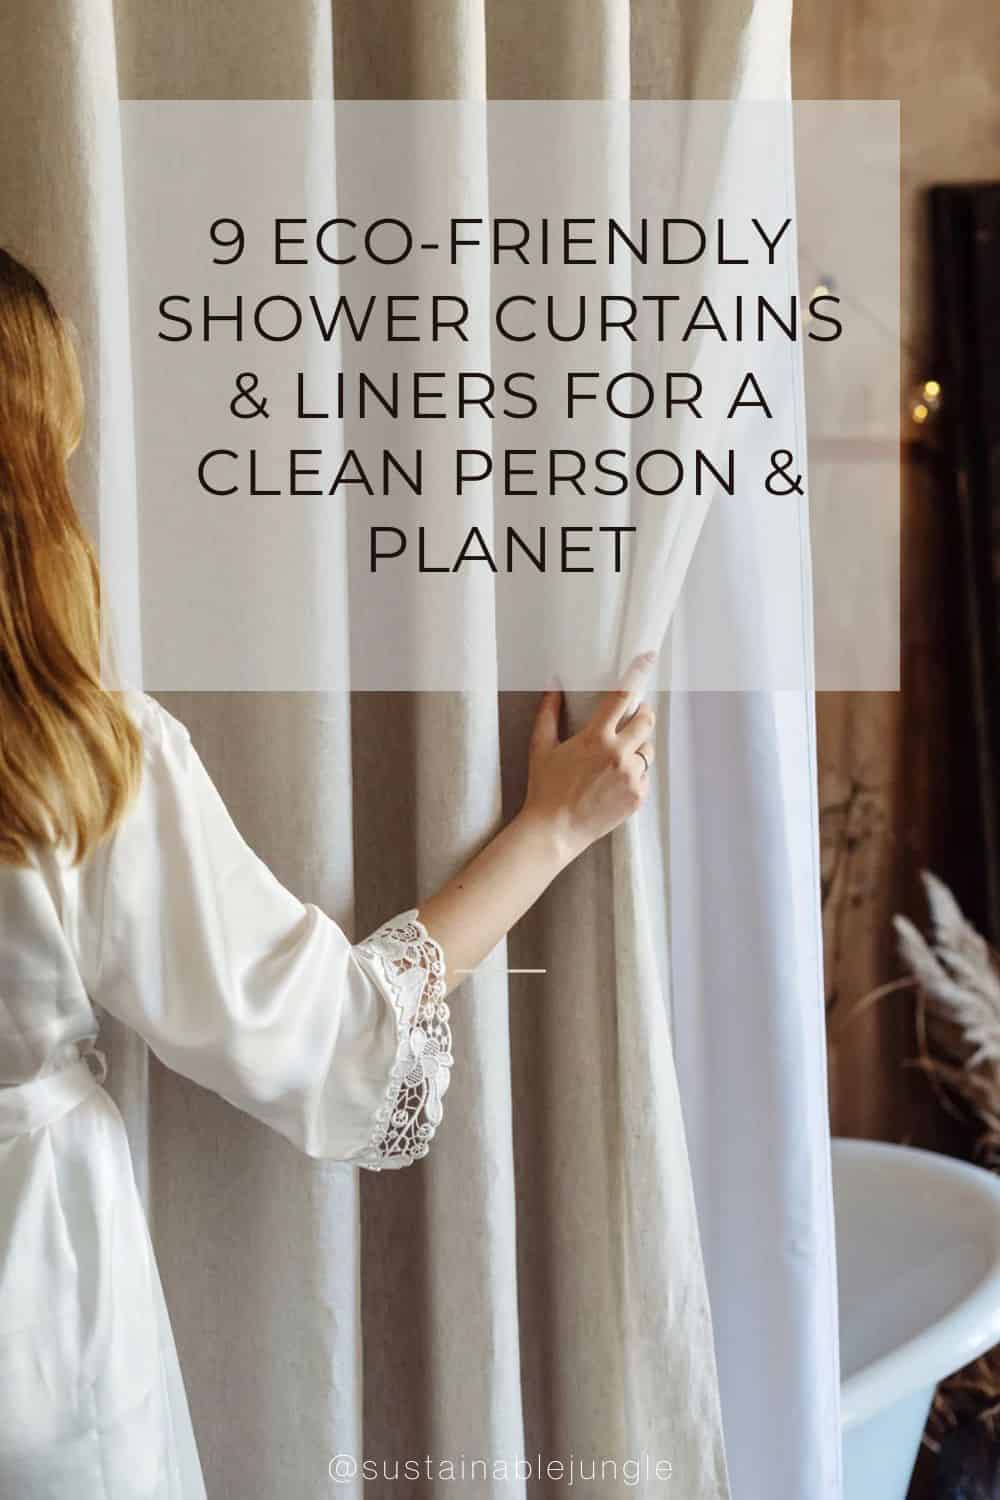 9 Eco-Friendly Shower Curtains & Liners For A Clean Person & Planet Image by Dusty Linen #ecofriendlyshowercurtains #ecofriendlyshowercurtainliners #ecoshowercurtains #sustainableshowercurtains #sustainableshowercurtainliners #naturalsustainableshowercurtains #sustainablejungle